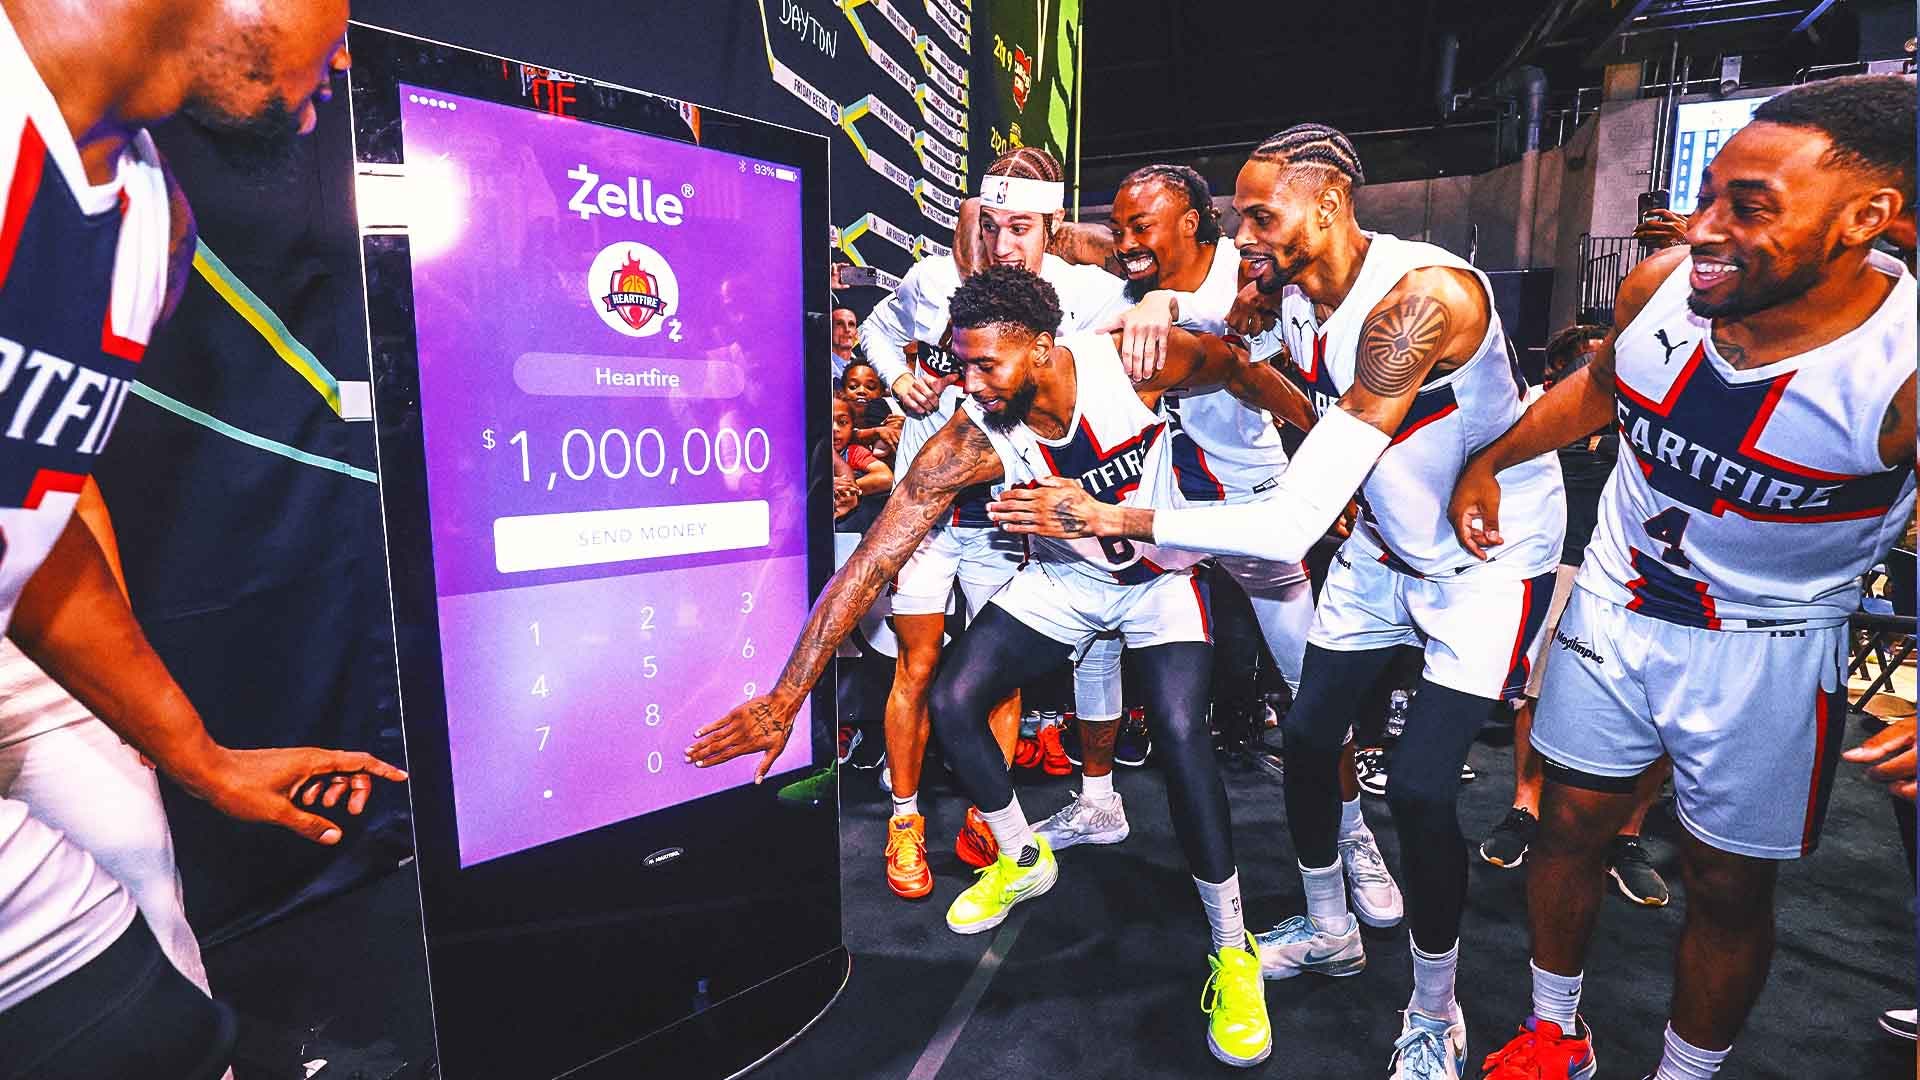 You are currently viewing The Basketball Tournament: What to know about $1 million winner-take-all event